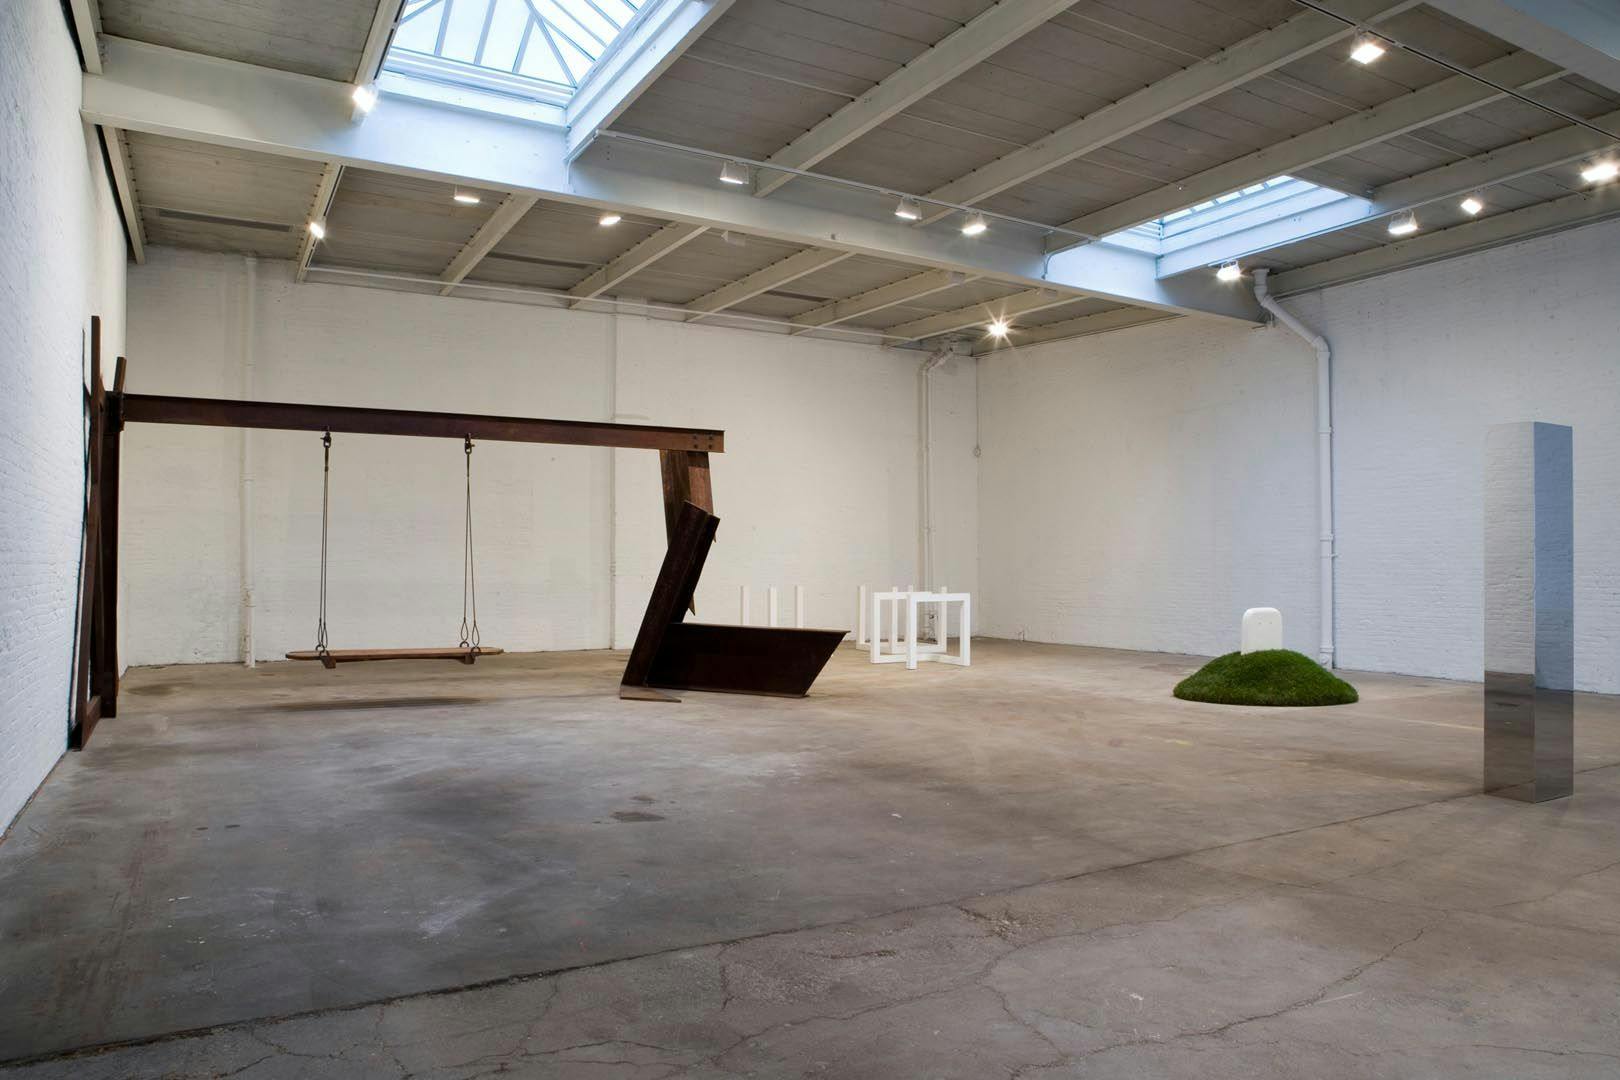 An installation view featuring works by Carol Bove and Harold Ancart, dated 2019